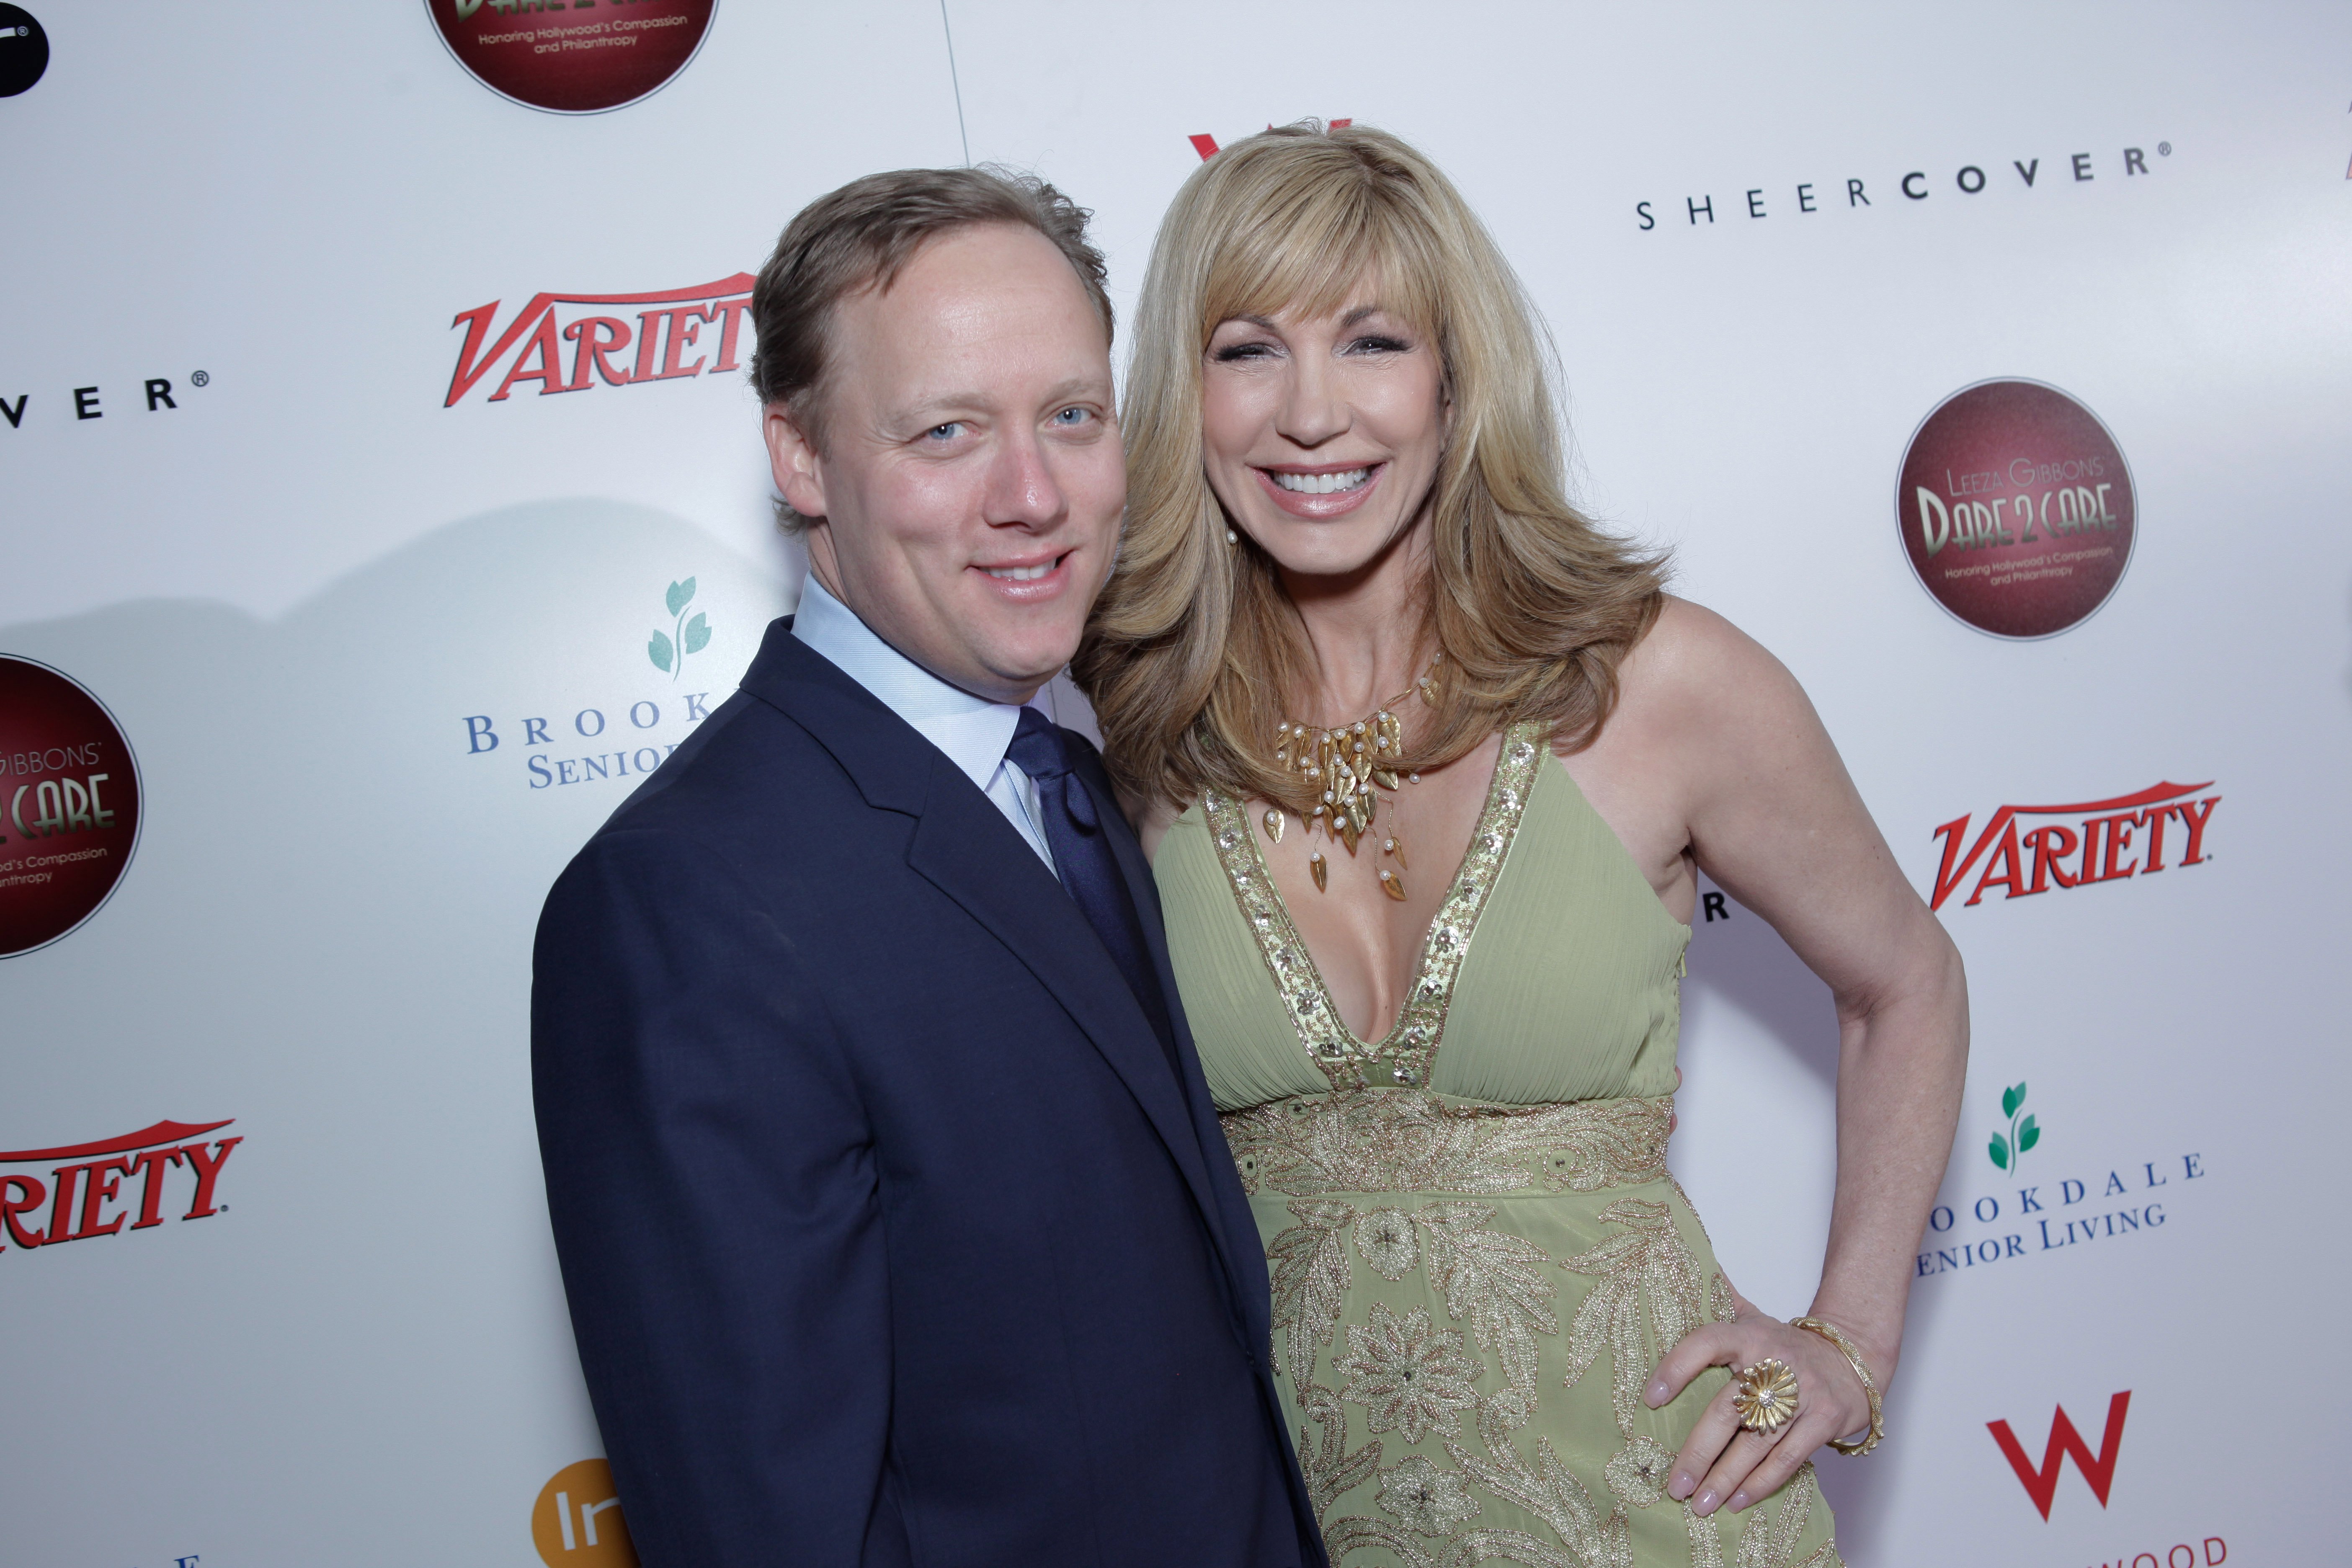 Steven Fenton and Leeza Gibbons are photographed at the Leeza Gibbon's Dare 2 Care Benefit at BOA Steakhouse on February 24, 2011, in West Hollywood | Source: Getty Images